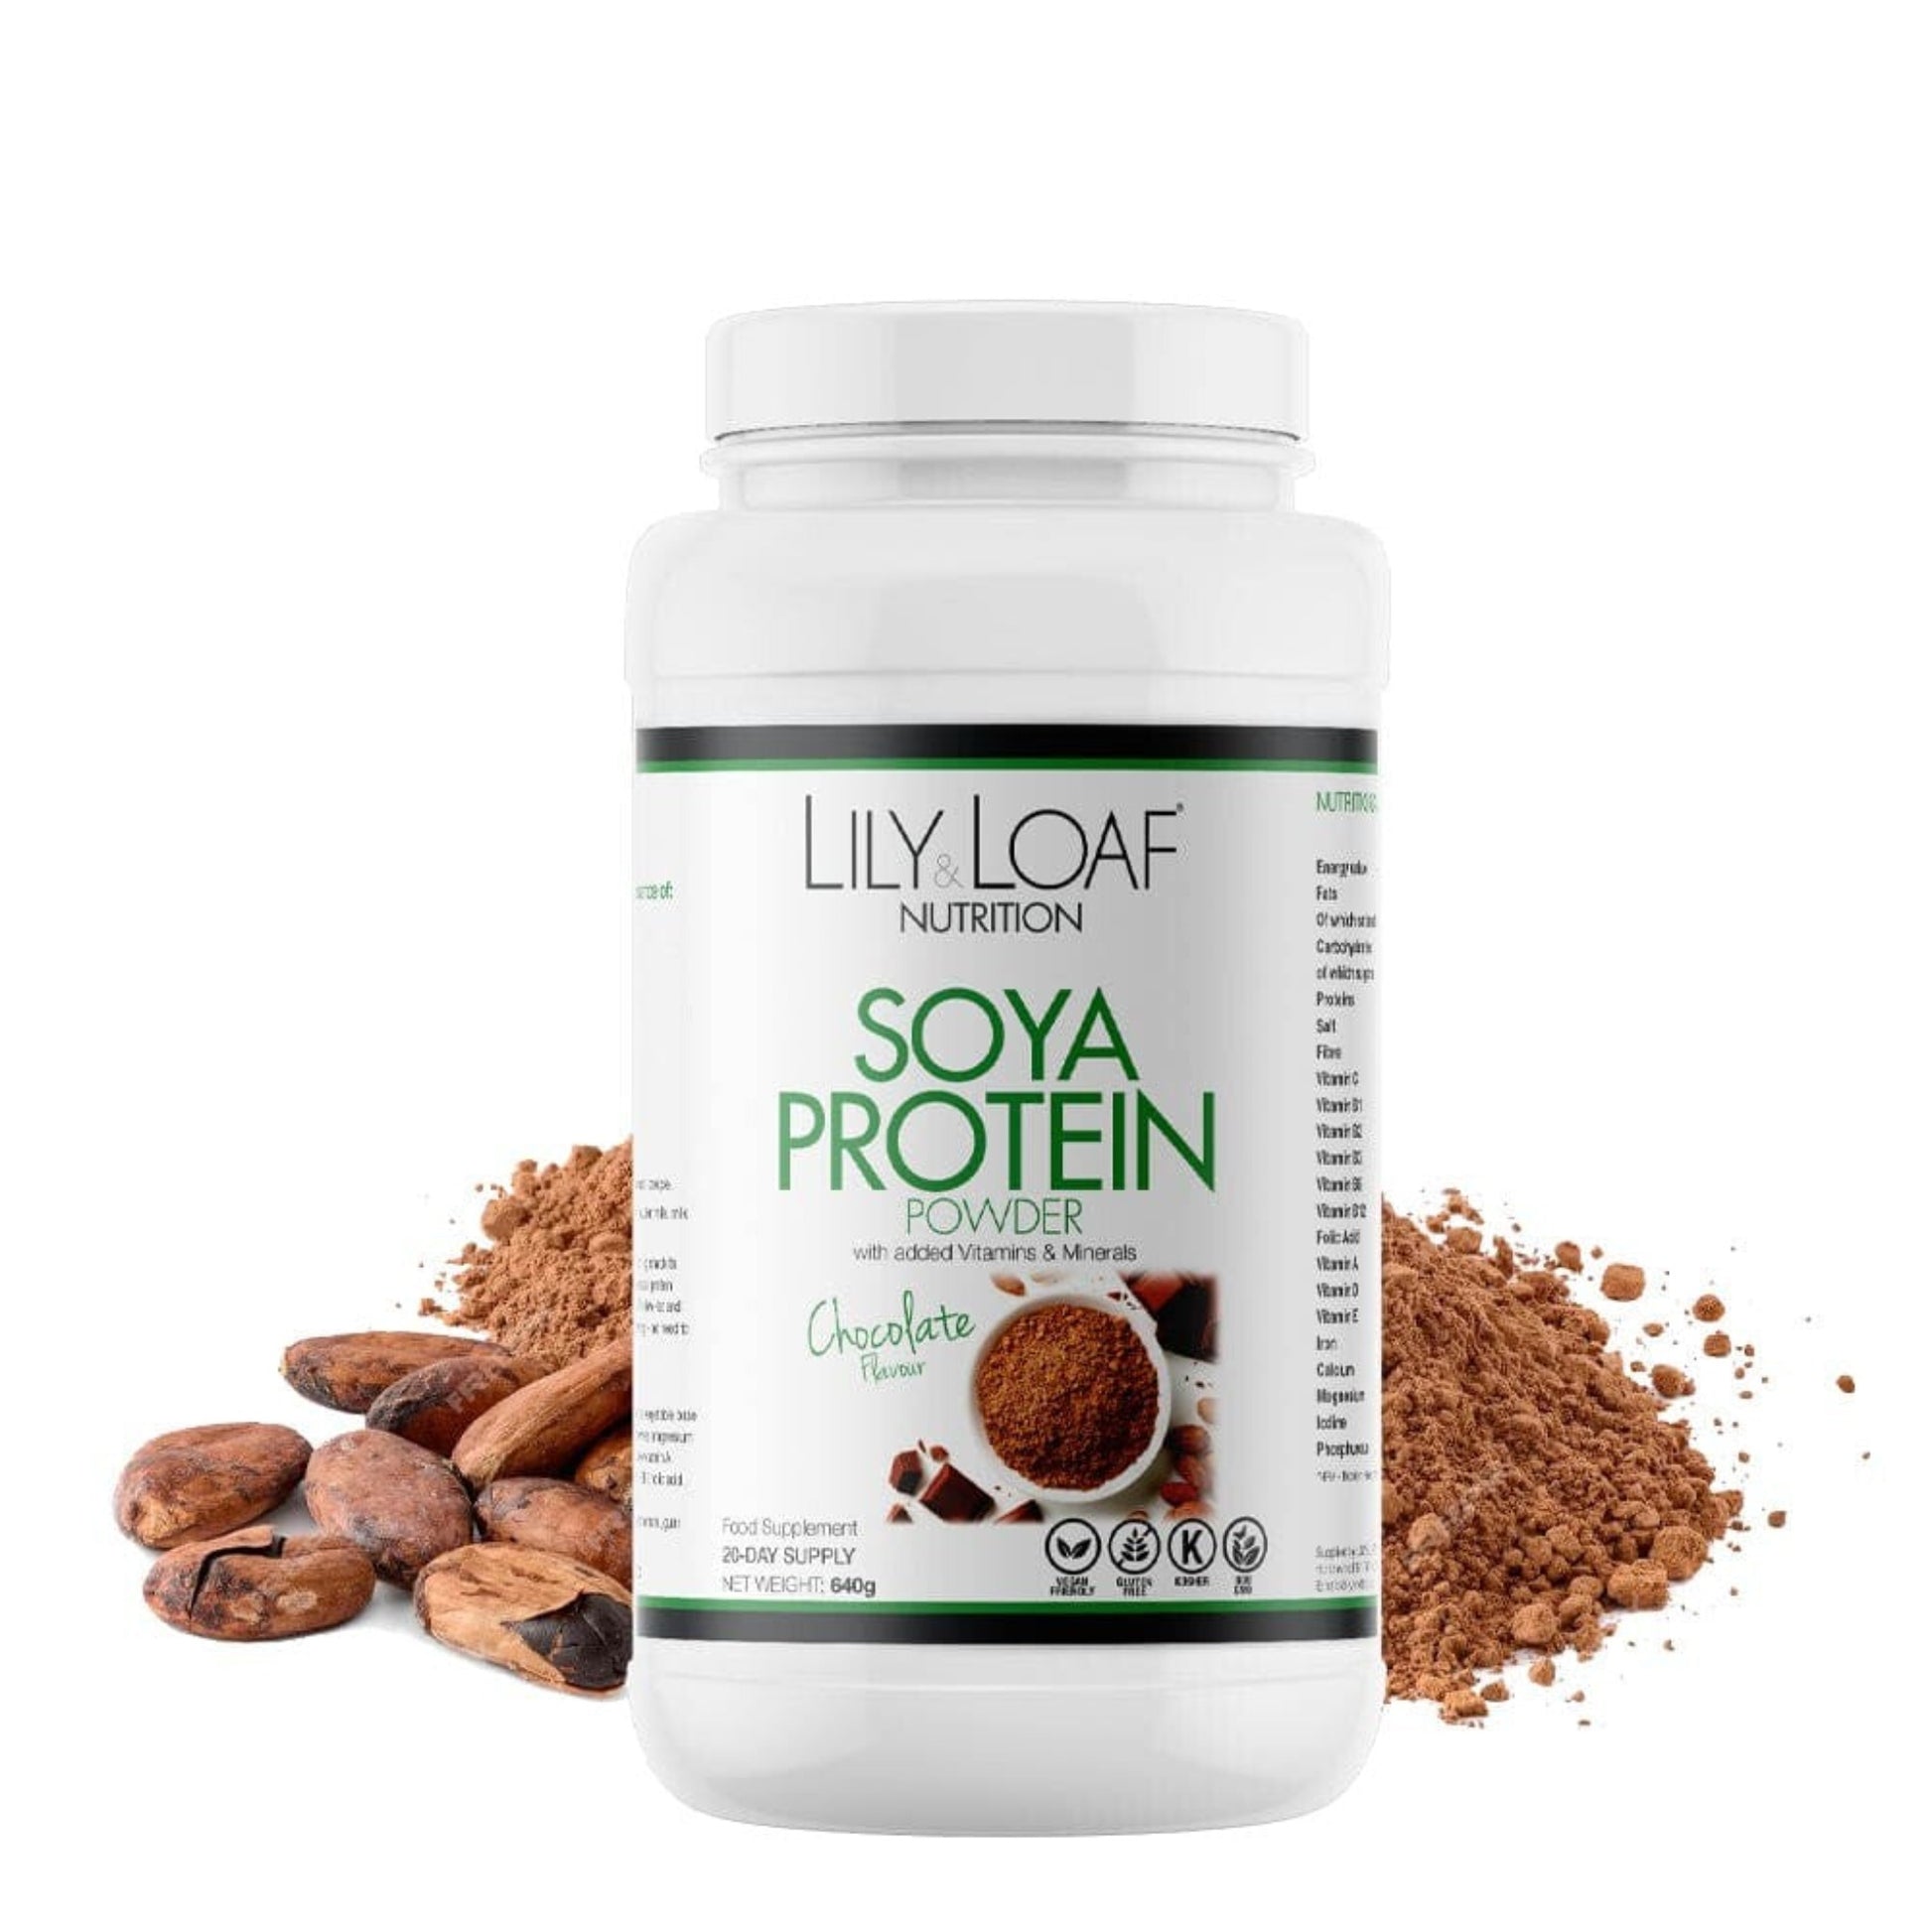 Lily & Loaf Soya Protein+ With Vitamins & Minerals - Chocolate Flavour Powder